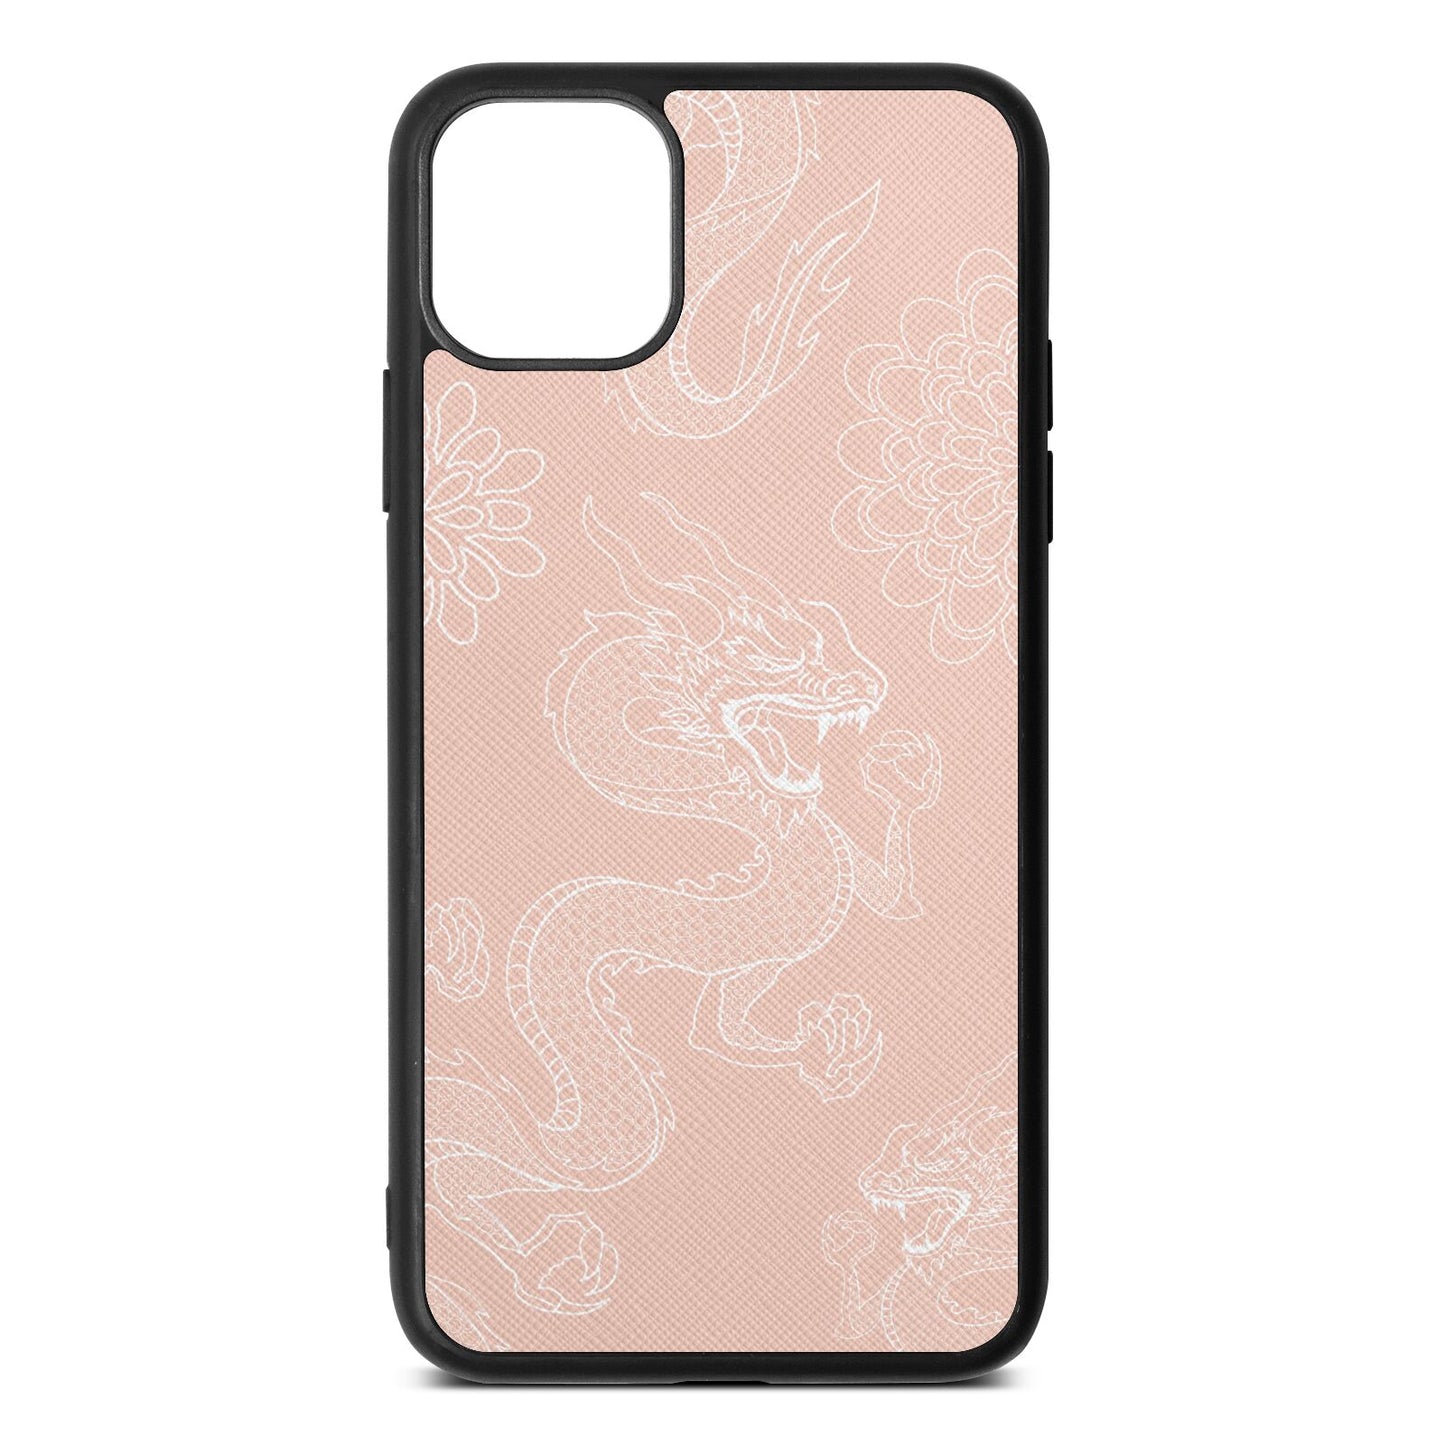 Dragons Nude Saffiano Leather iPhone 11 Pro Max Case